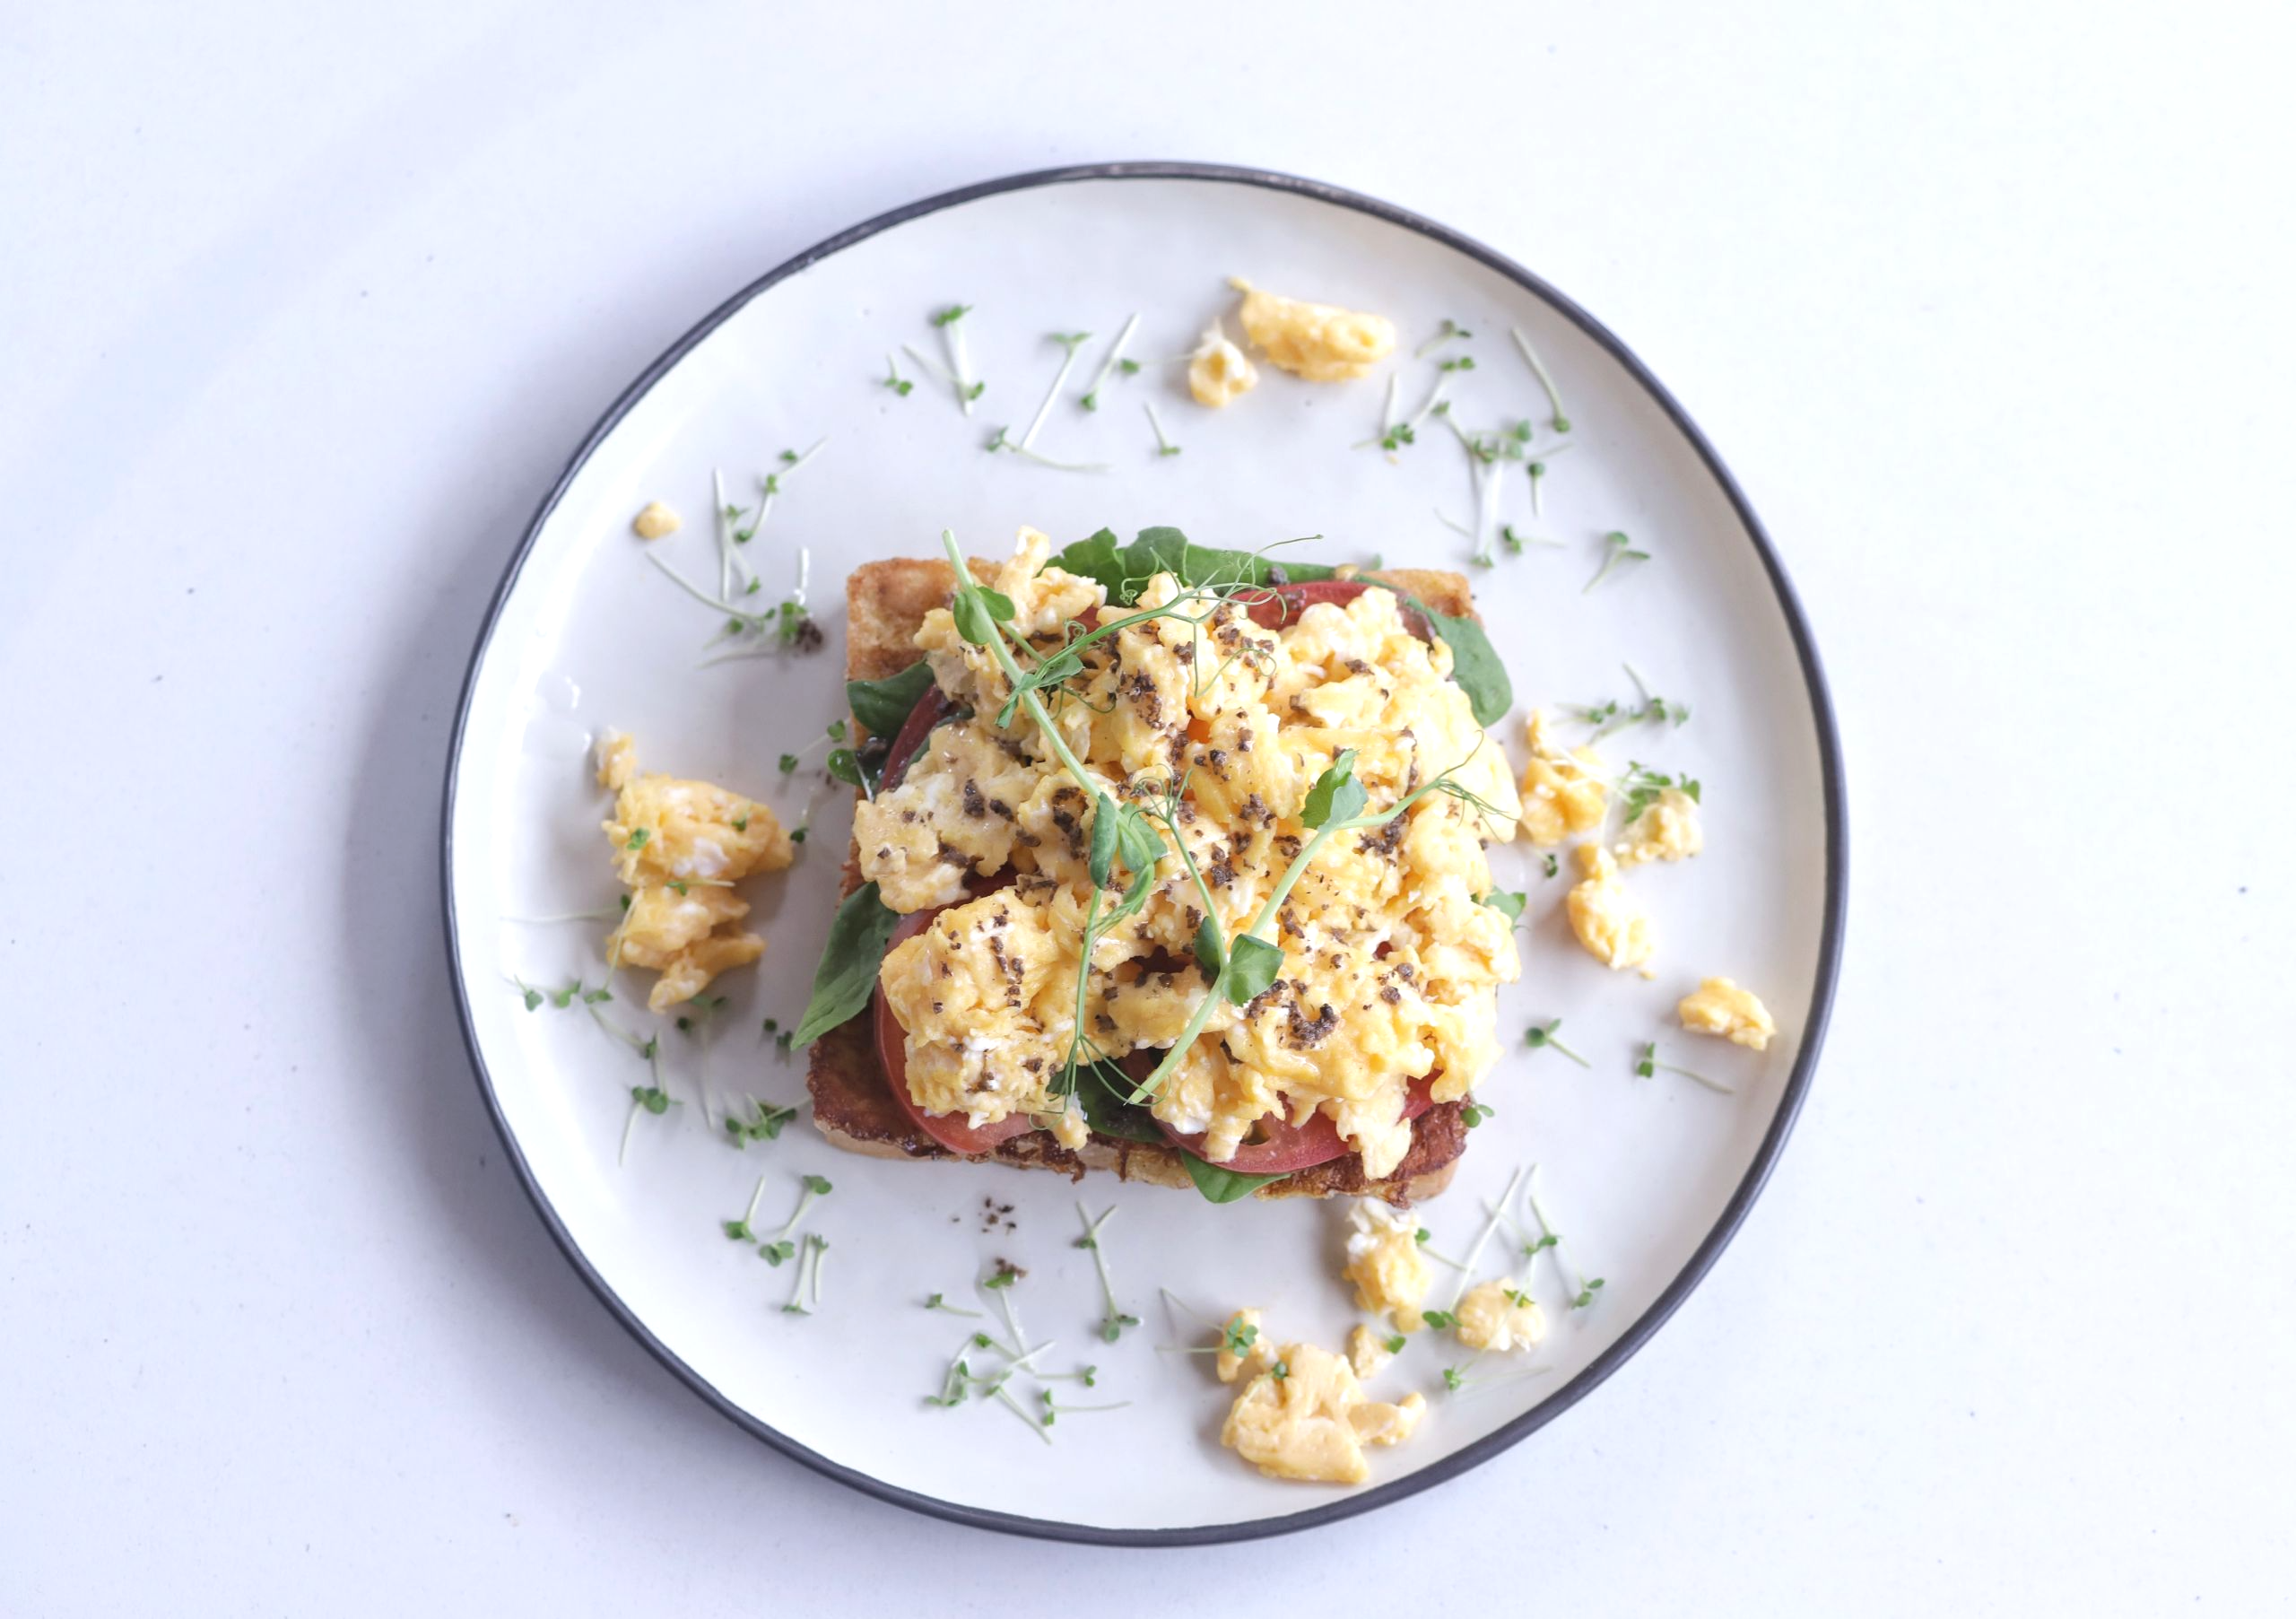 <span style="color: #fc0000;">NEW!</span> Brioche with truffled scrambled eggs, pink tomatoes and spinach